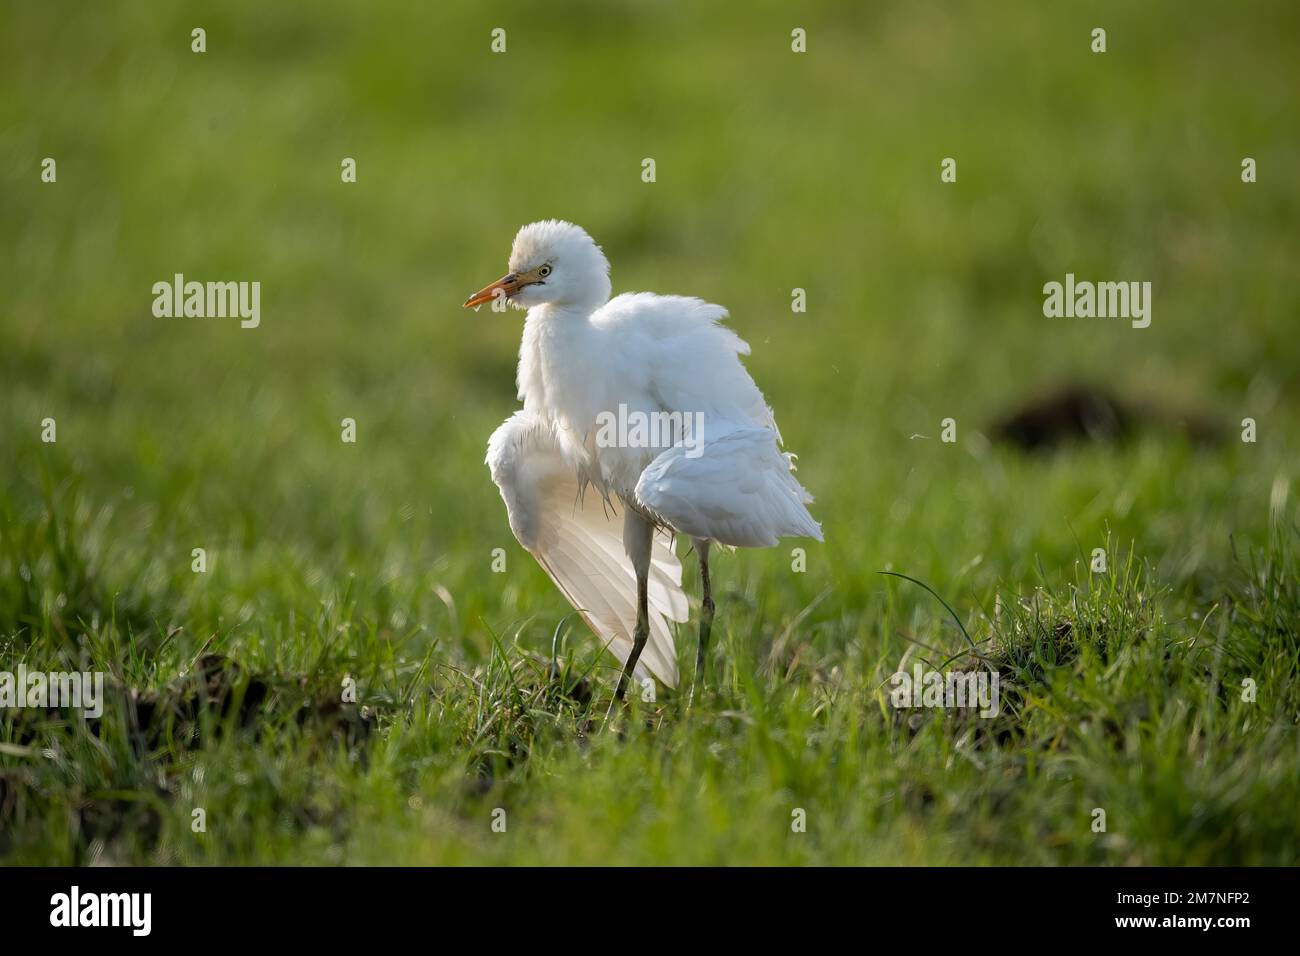 Cattle egret, (Bubulcus ibis) standing on the grass in the uk in Summer on a farm Stock Photo